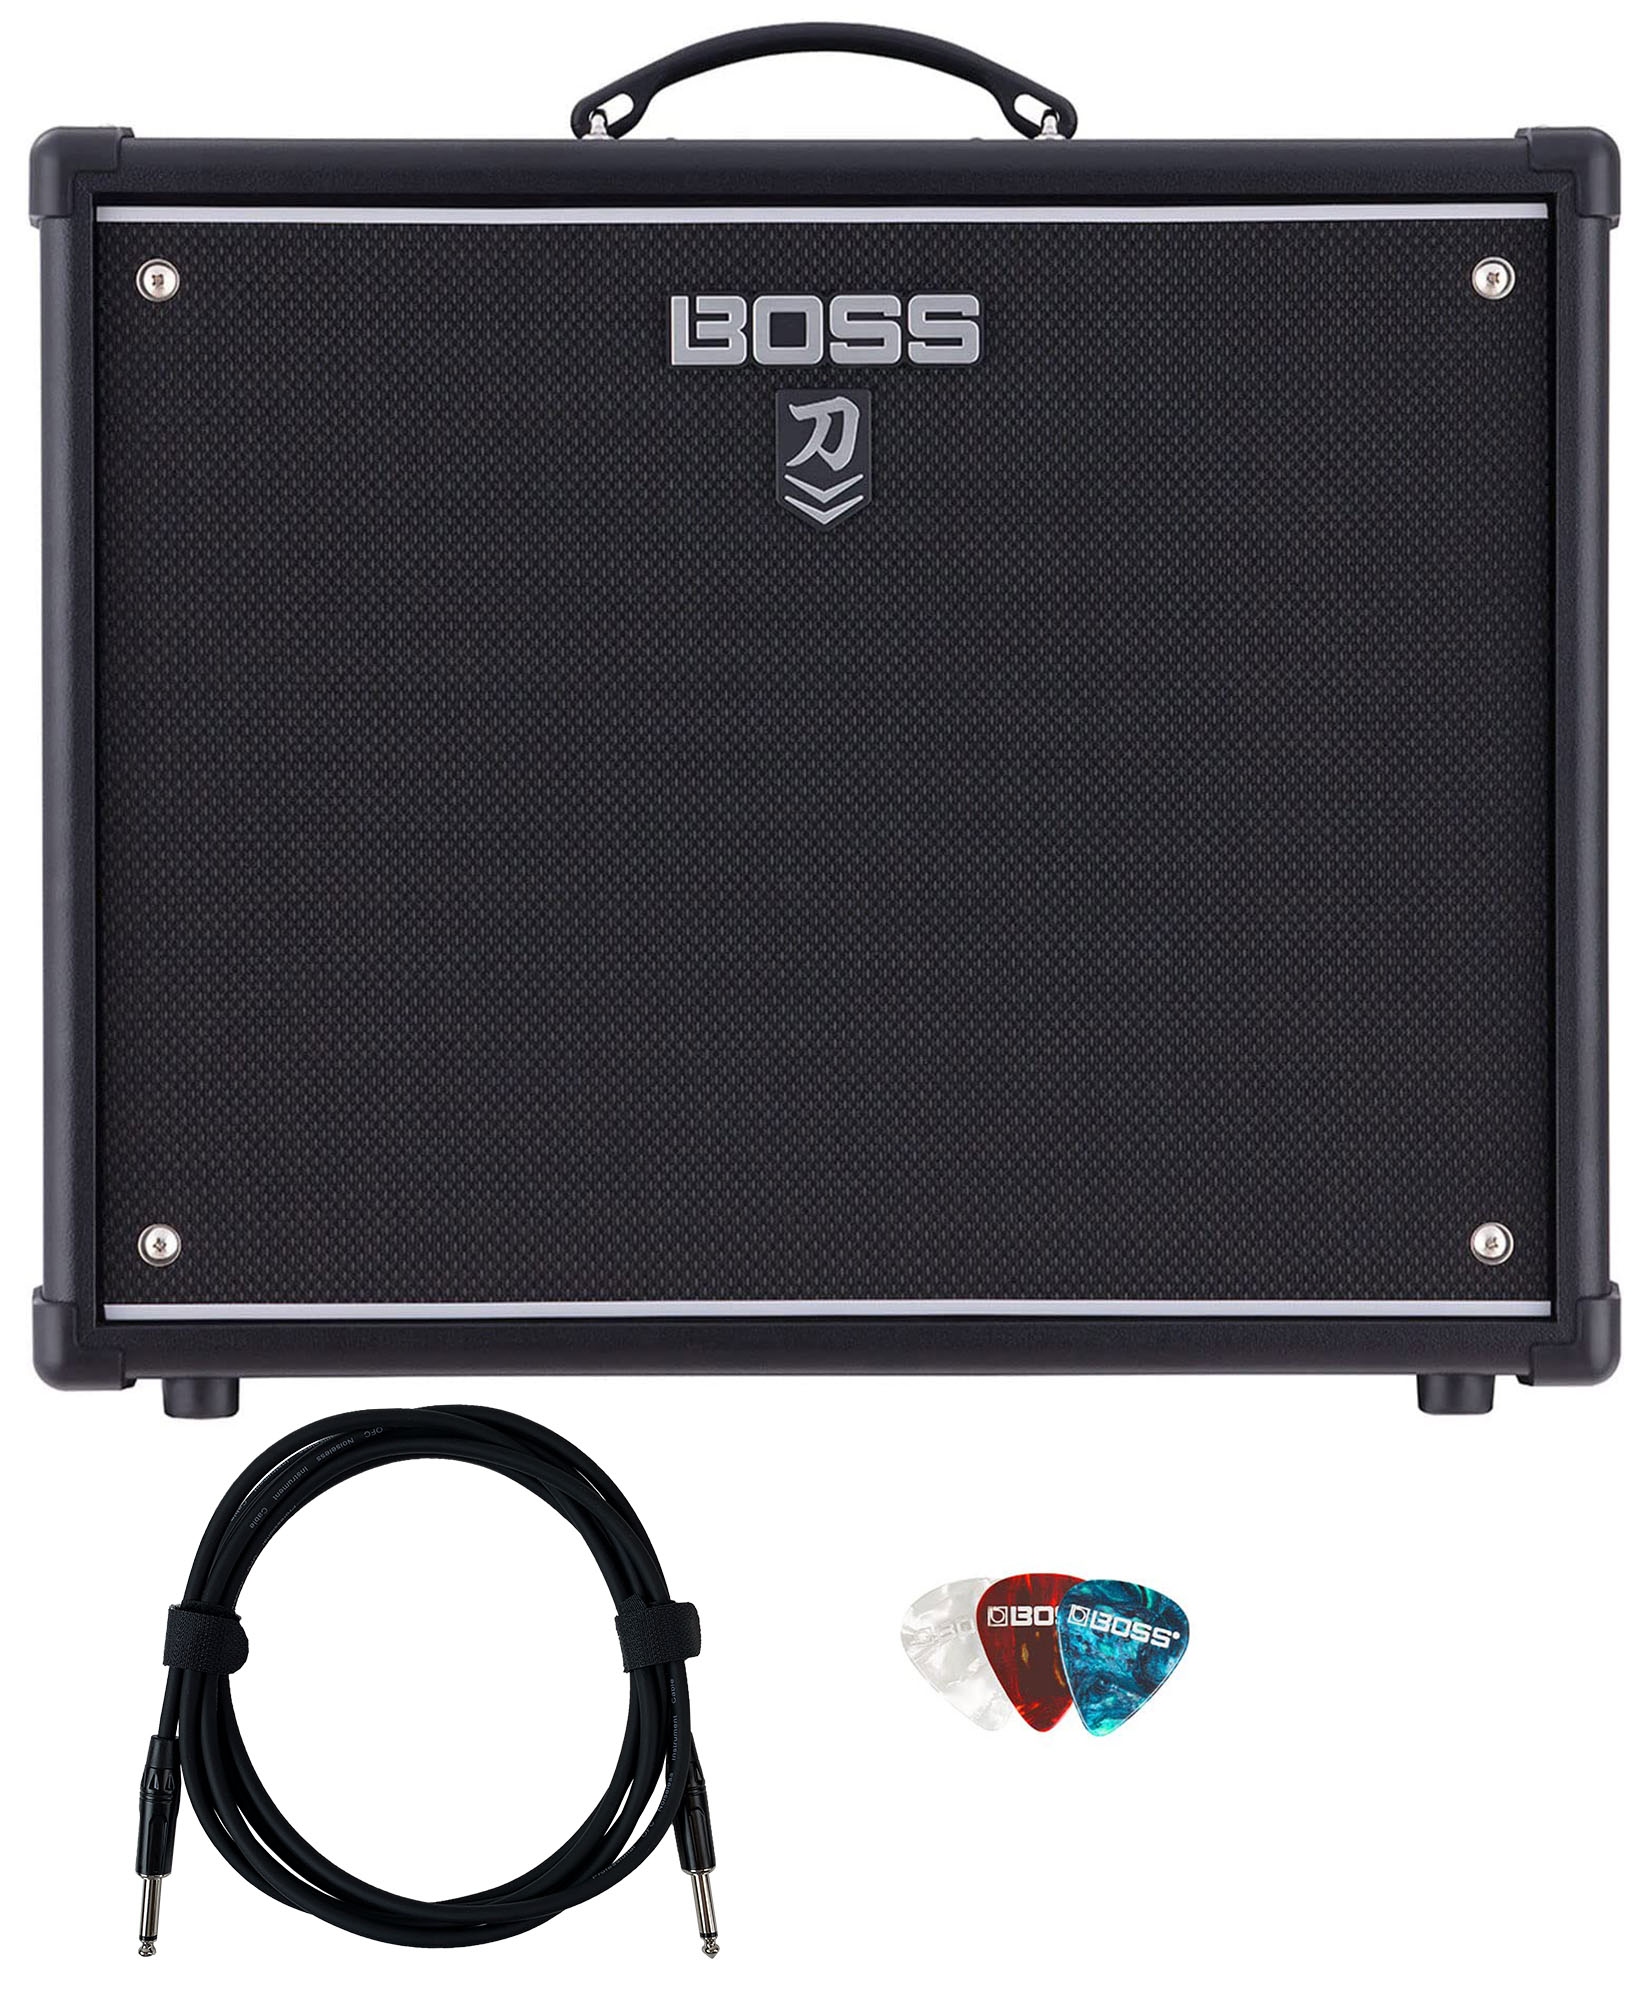 Boss 100 MkII Guitar Combo Amplifier w/ Cable | eBay